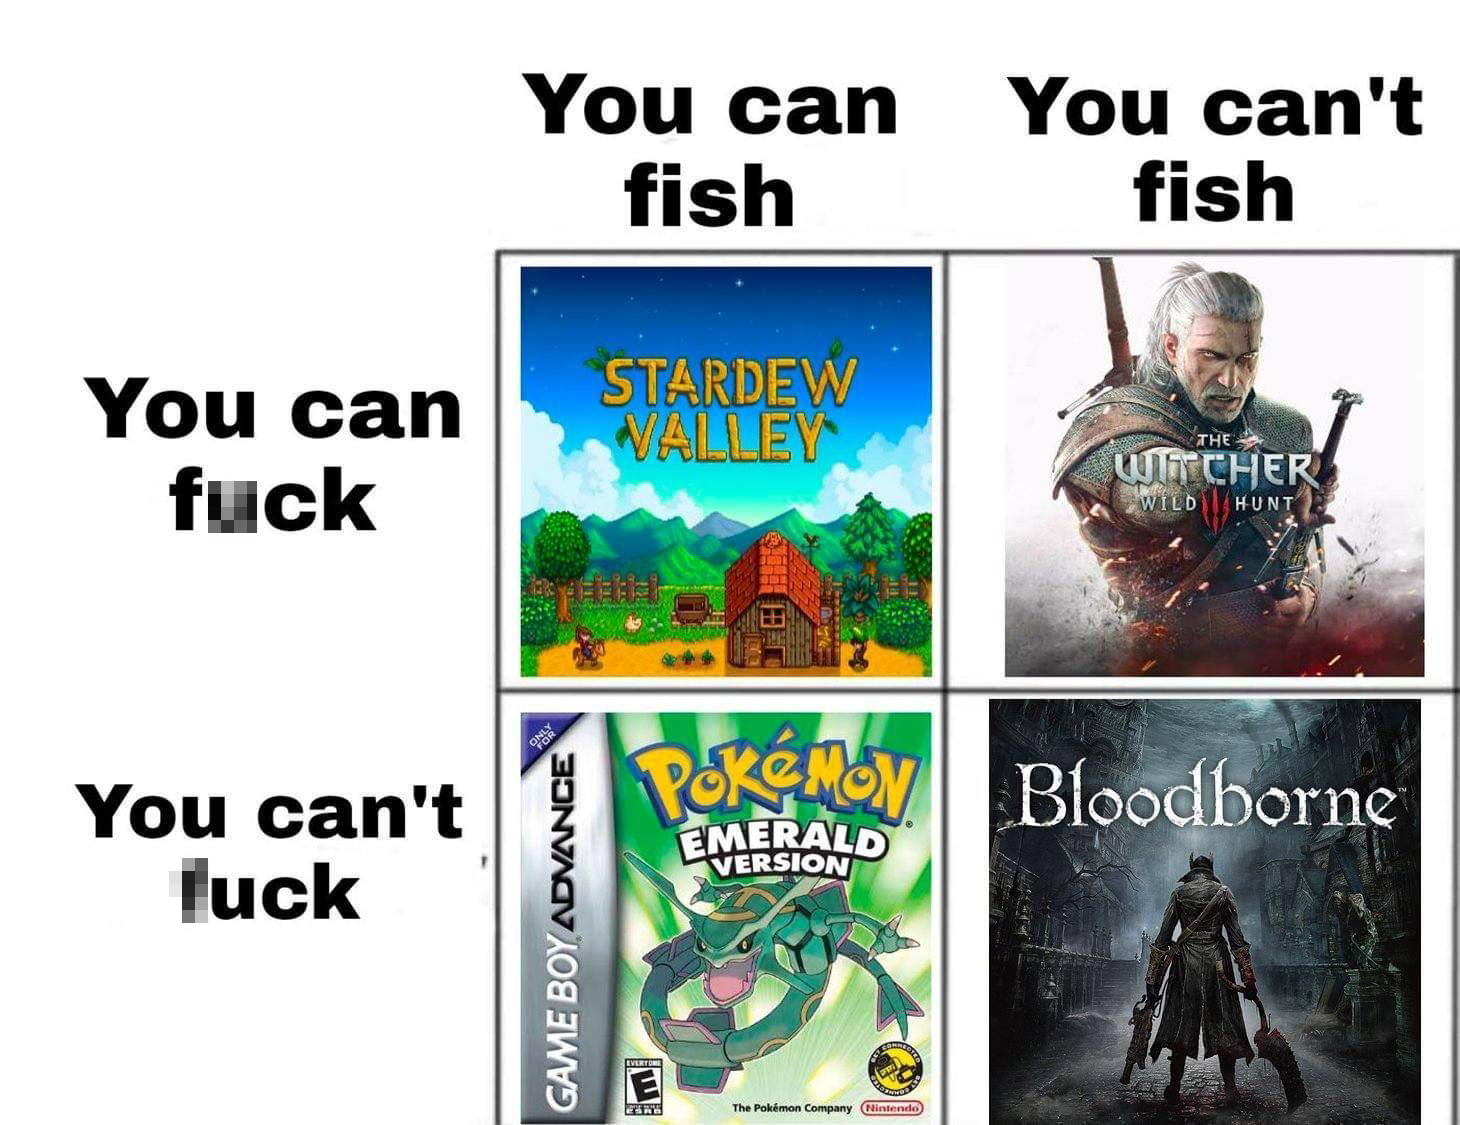 ou can't luck You can fish Game Boy Advance